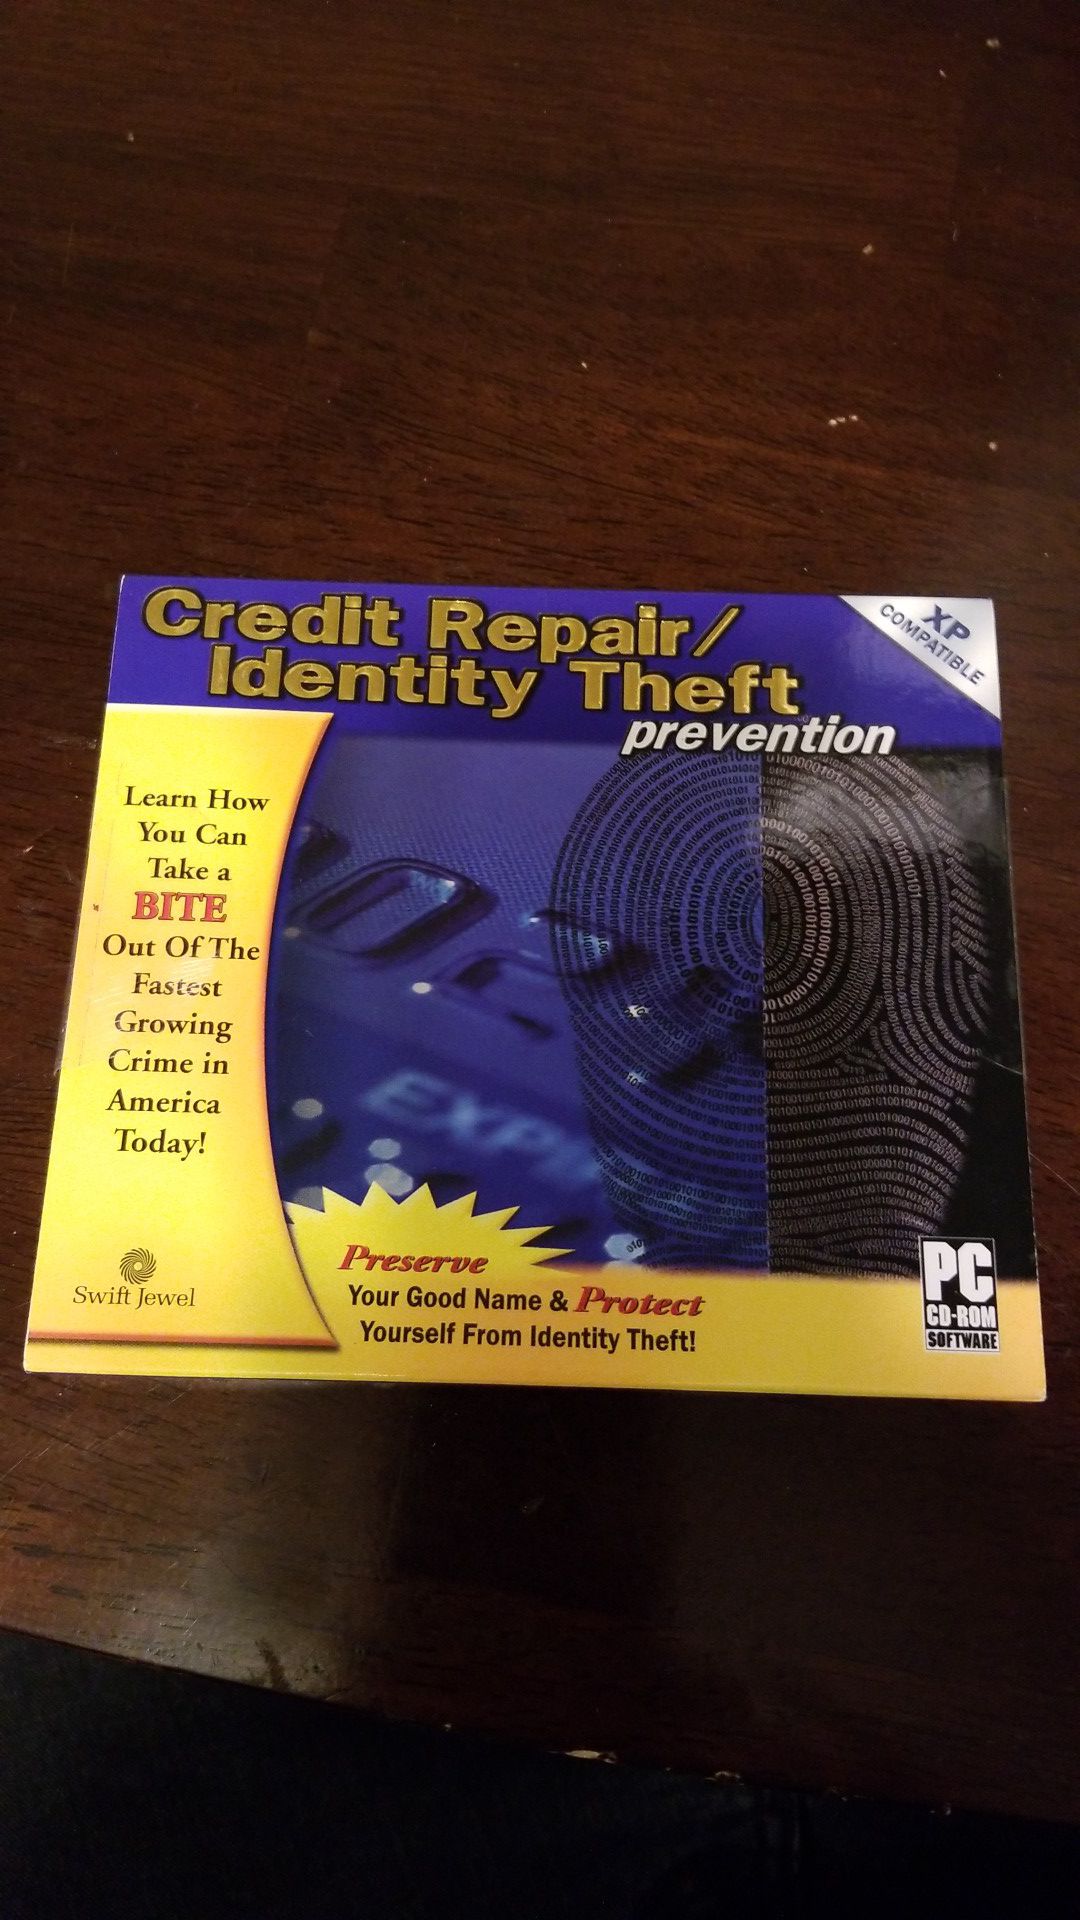 CD software disc - credit repair/identity theft